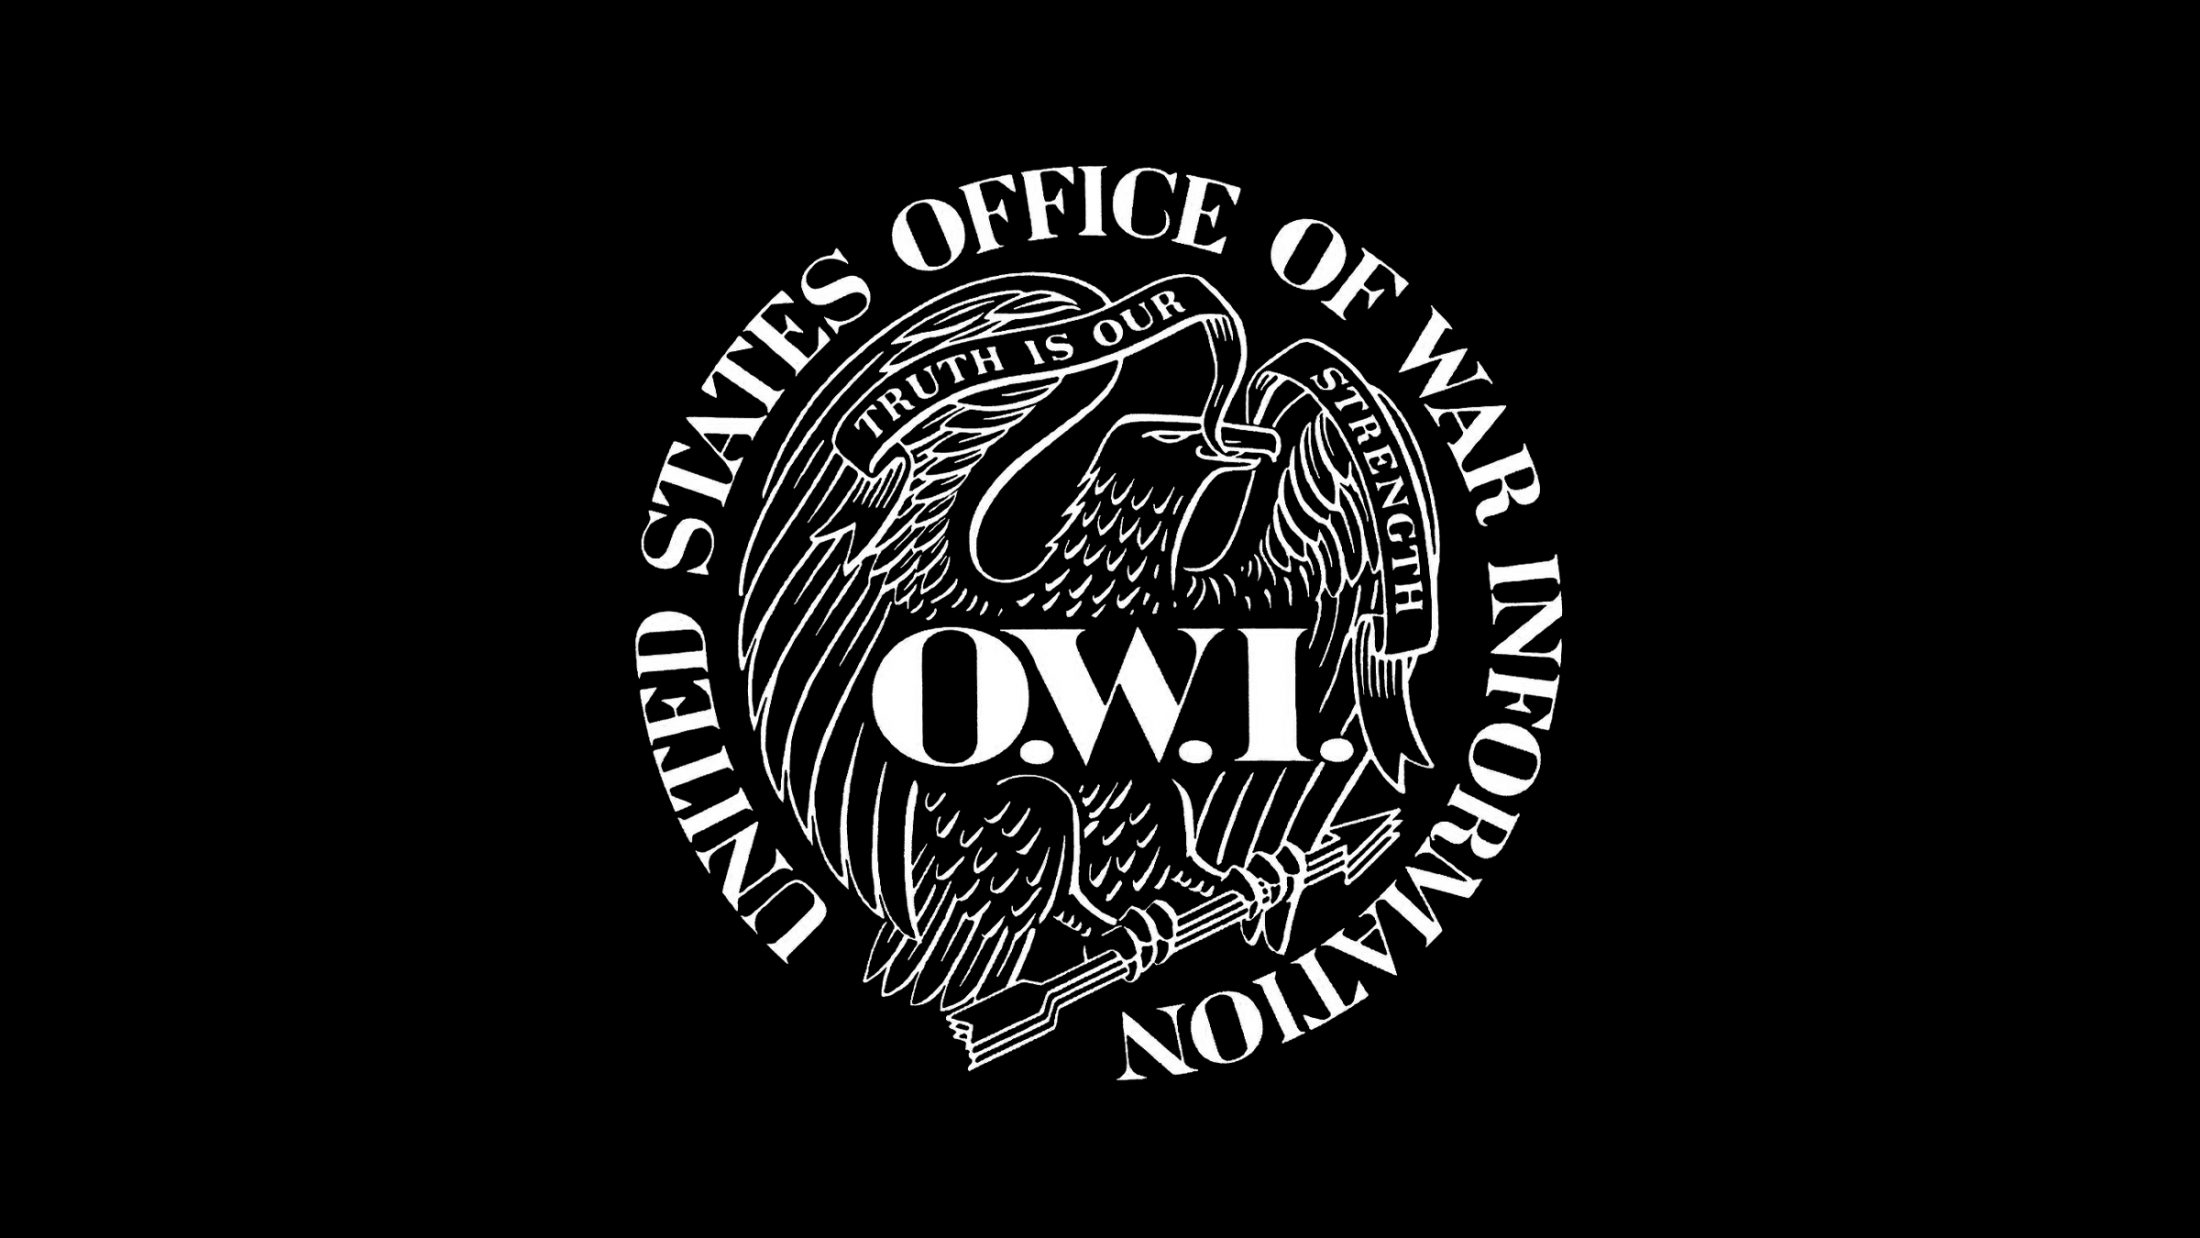 United States Office of War Information (OWI) seal, enhanced and inverted, originally from Wikipedia and the public domain